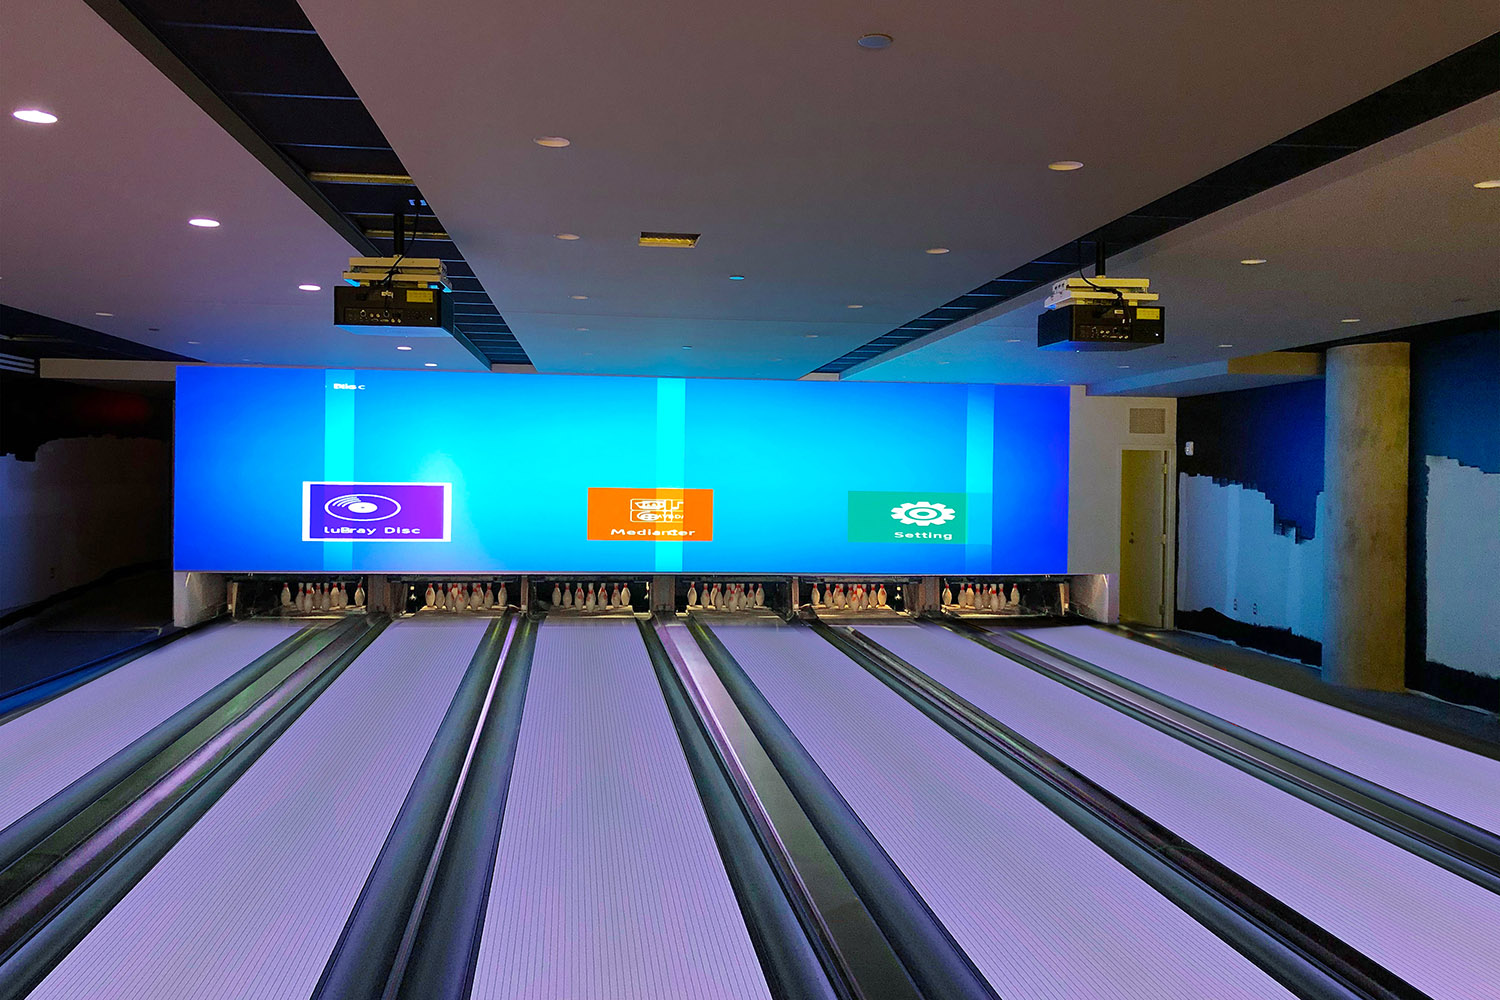 The videowall system enables the first-floor bowlers and the bar patrons to watch sporting events and other content on any portion of the videowall. Those in the second-floor bowling alley can have an identical or unique viewing experience.